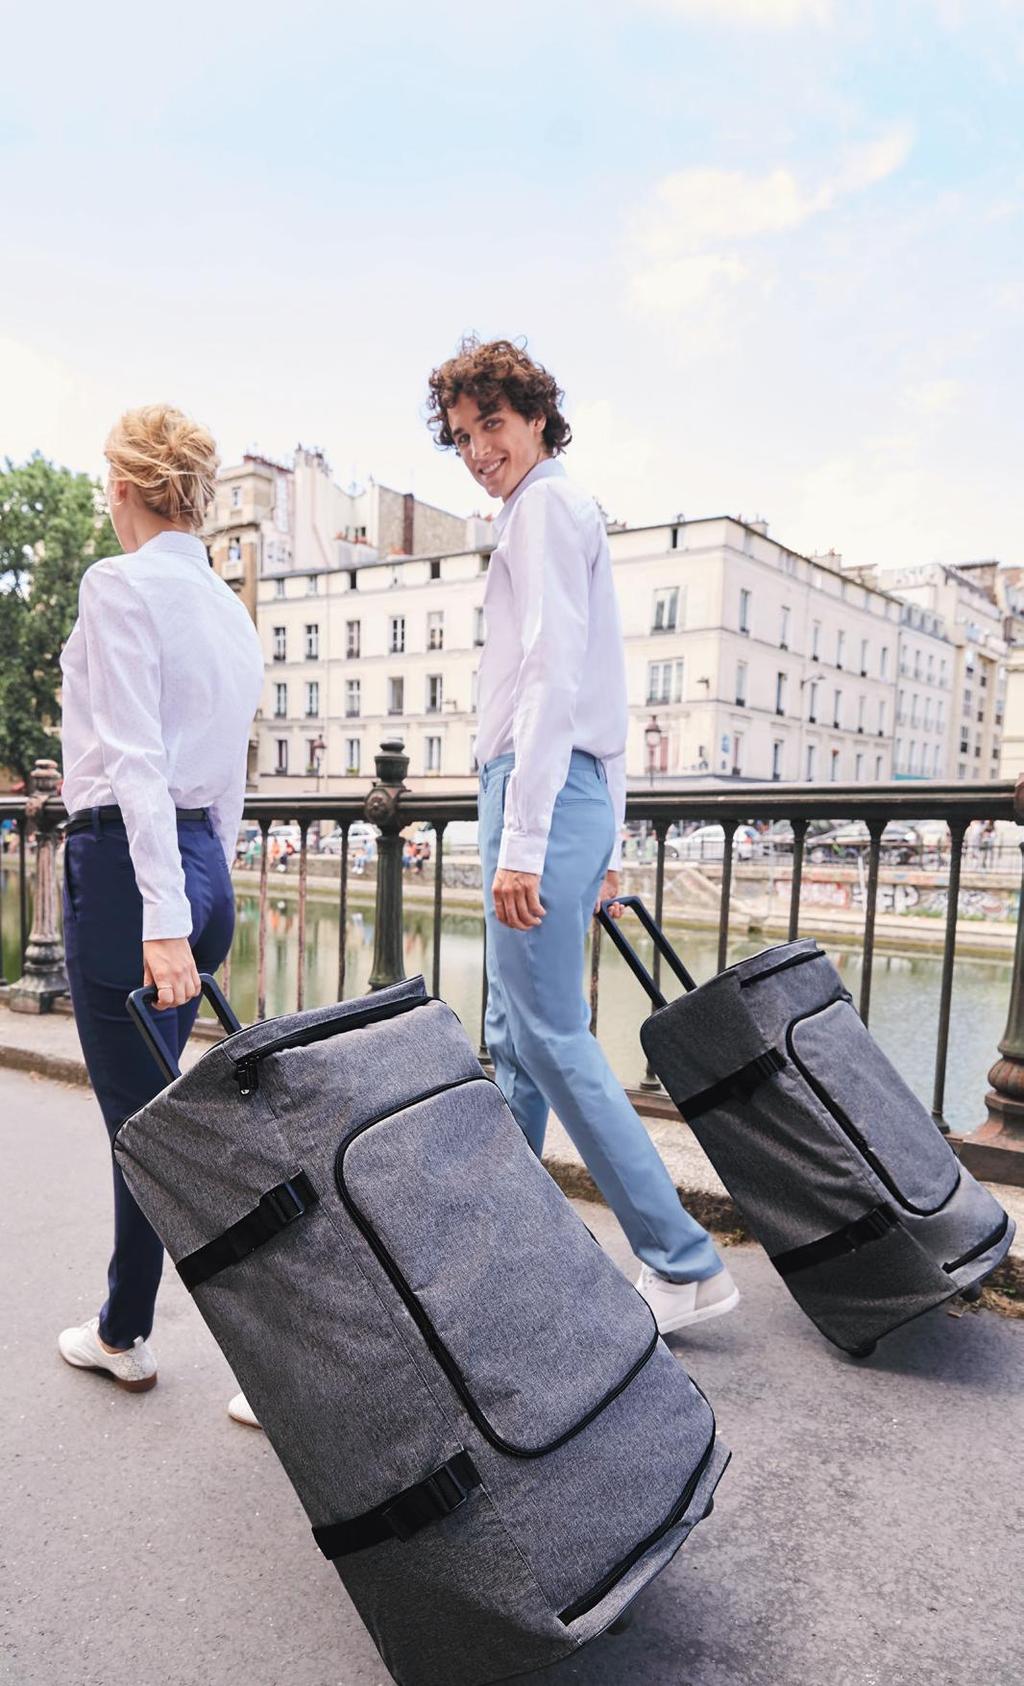 BAGS CAPACITY, REMOVABLE POCKET FOR EASY PRINTING LARGE USE: IT PARTICULARLY MEETS THE PERSONAL EQUIPMENT MARKET NEEDS HE 350 Globe Trotter 79 02925 LARGE TROLLEY SUITCASE NEON QUALITY - 300D - 100%